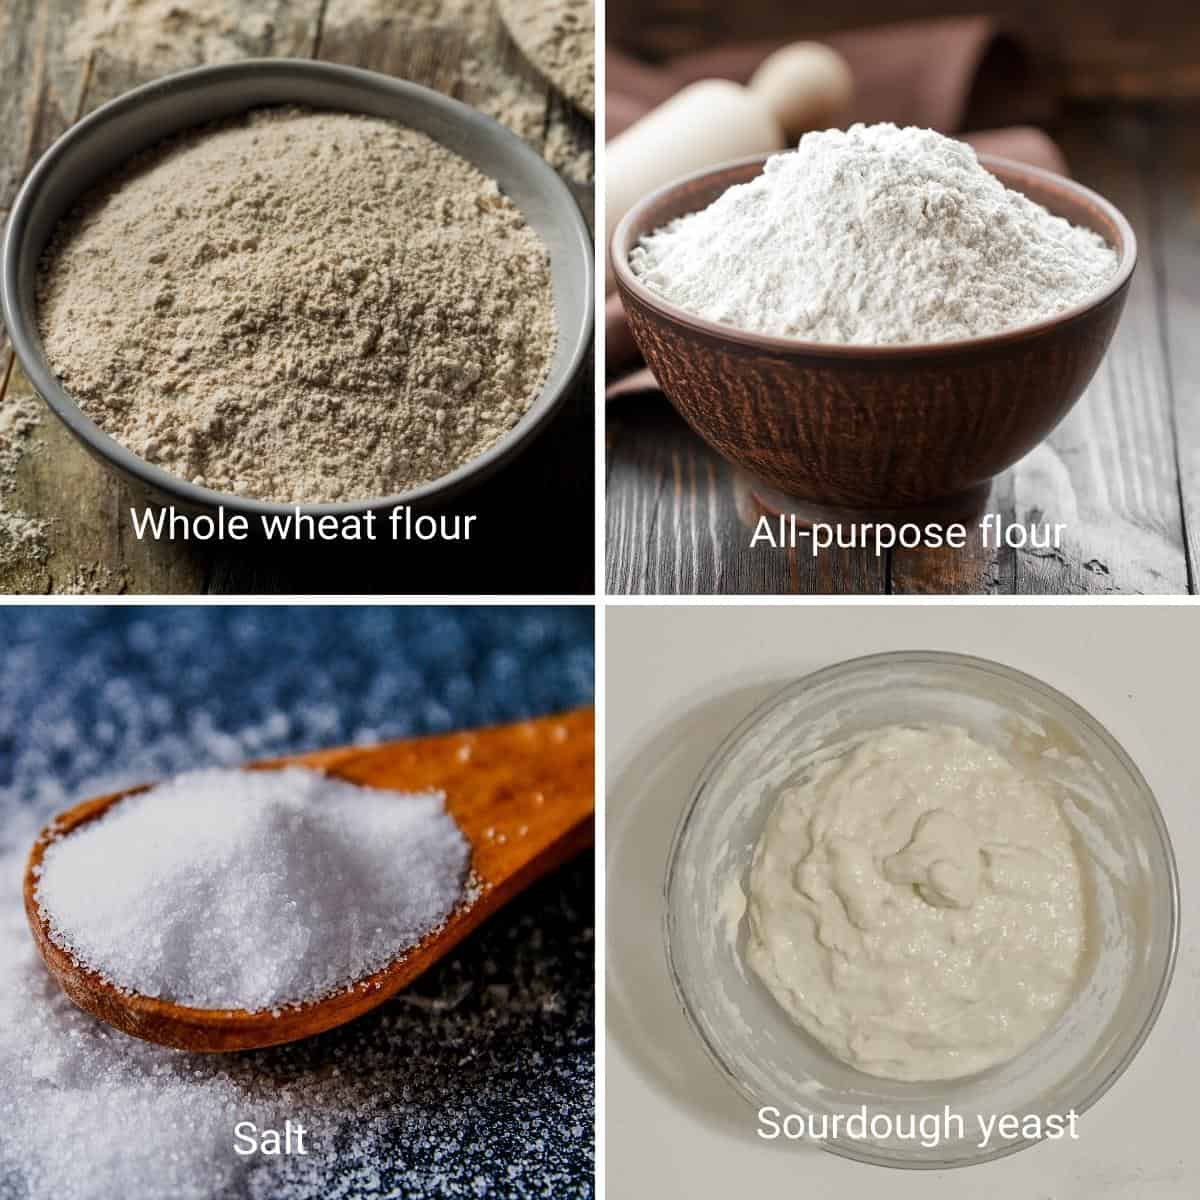 Ingredients for sourdough with whole wheat flour.